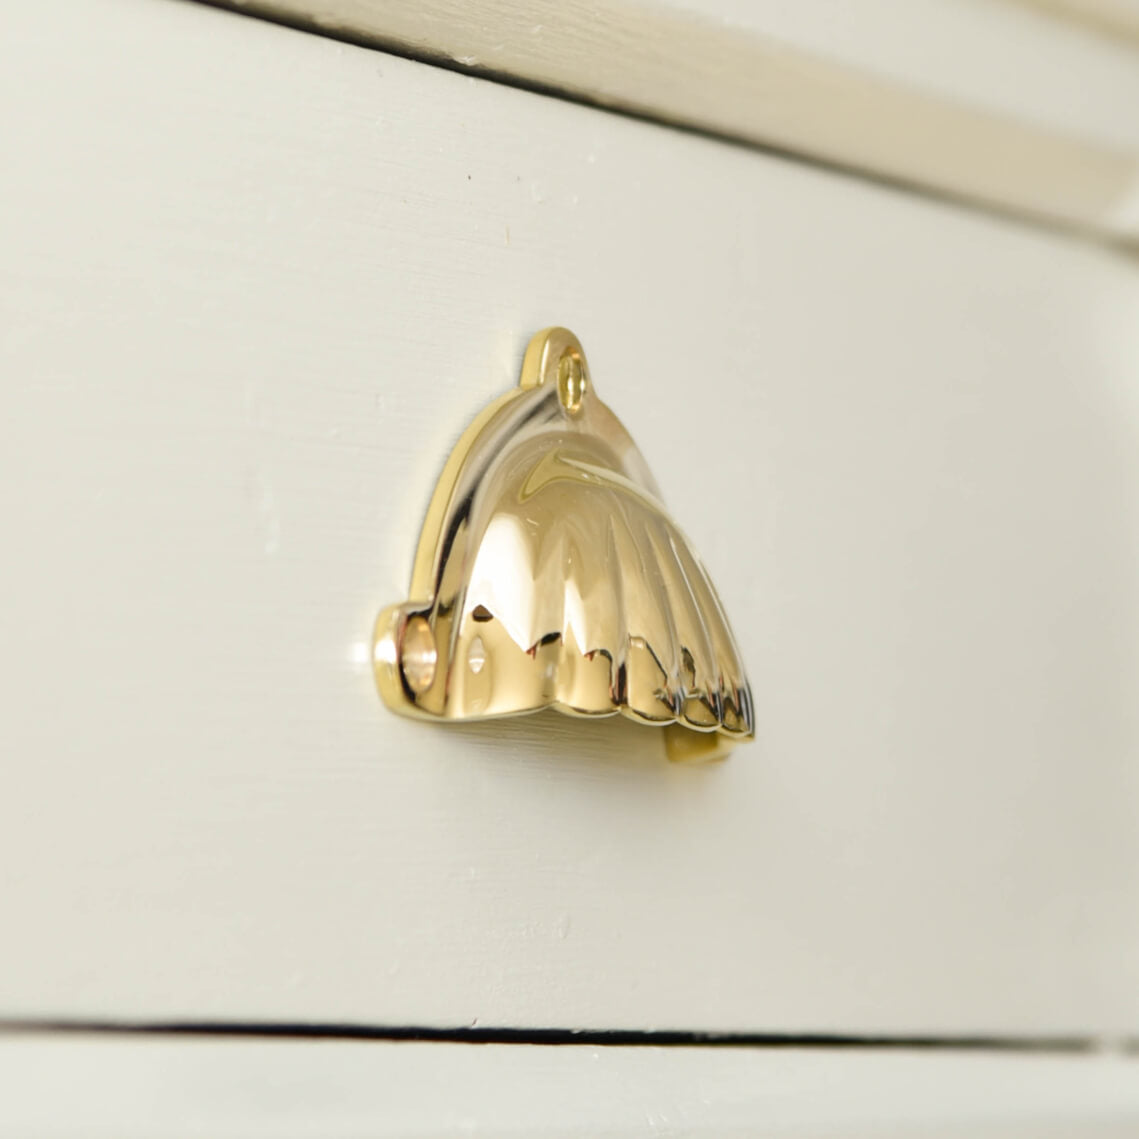 scalloped brass drawer pull seen in profile on beige drawers